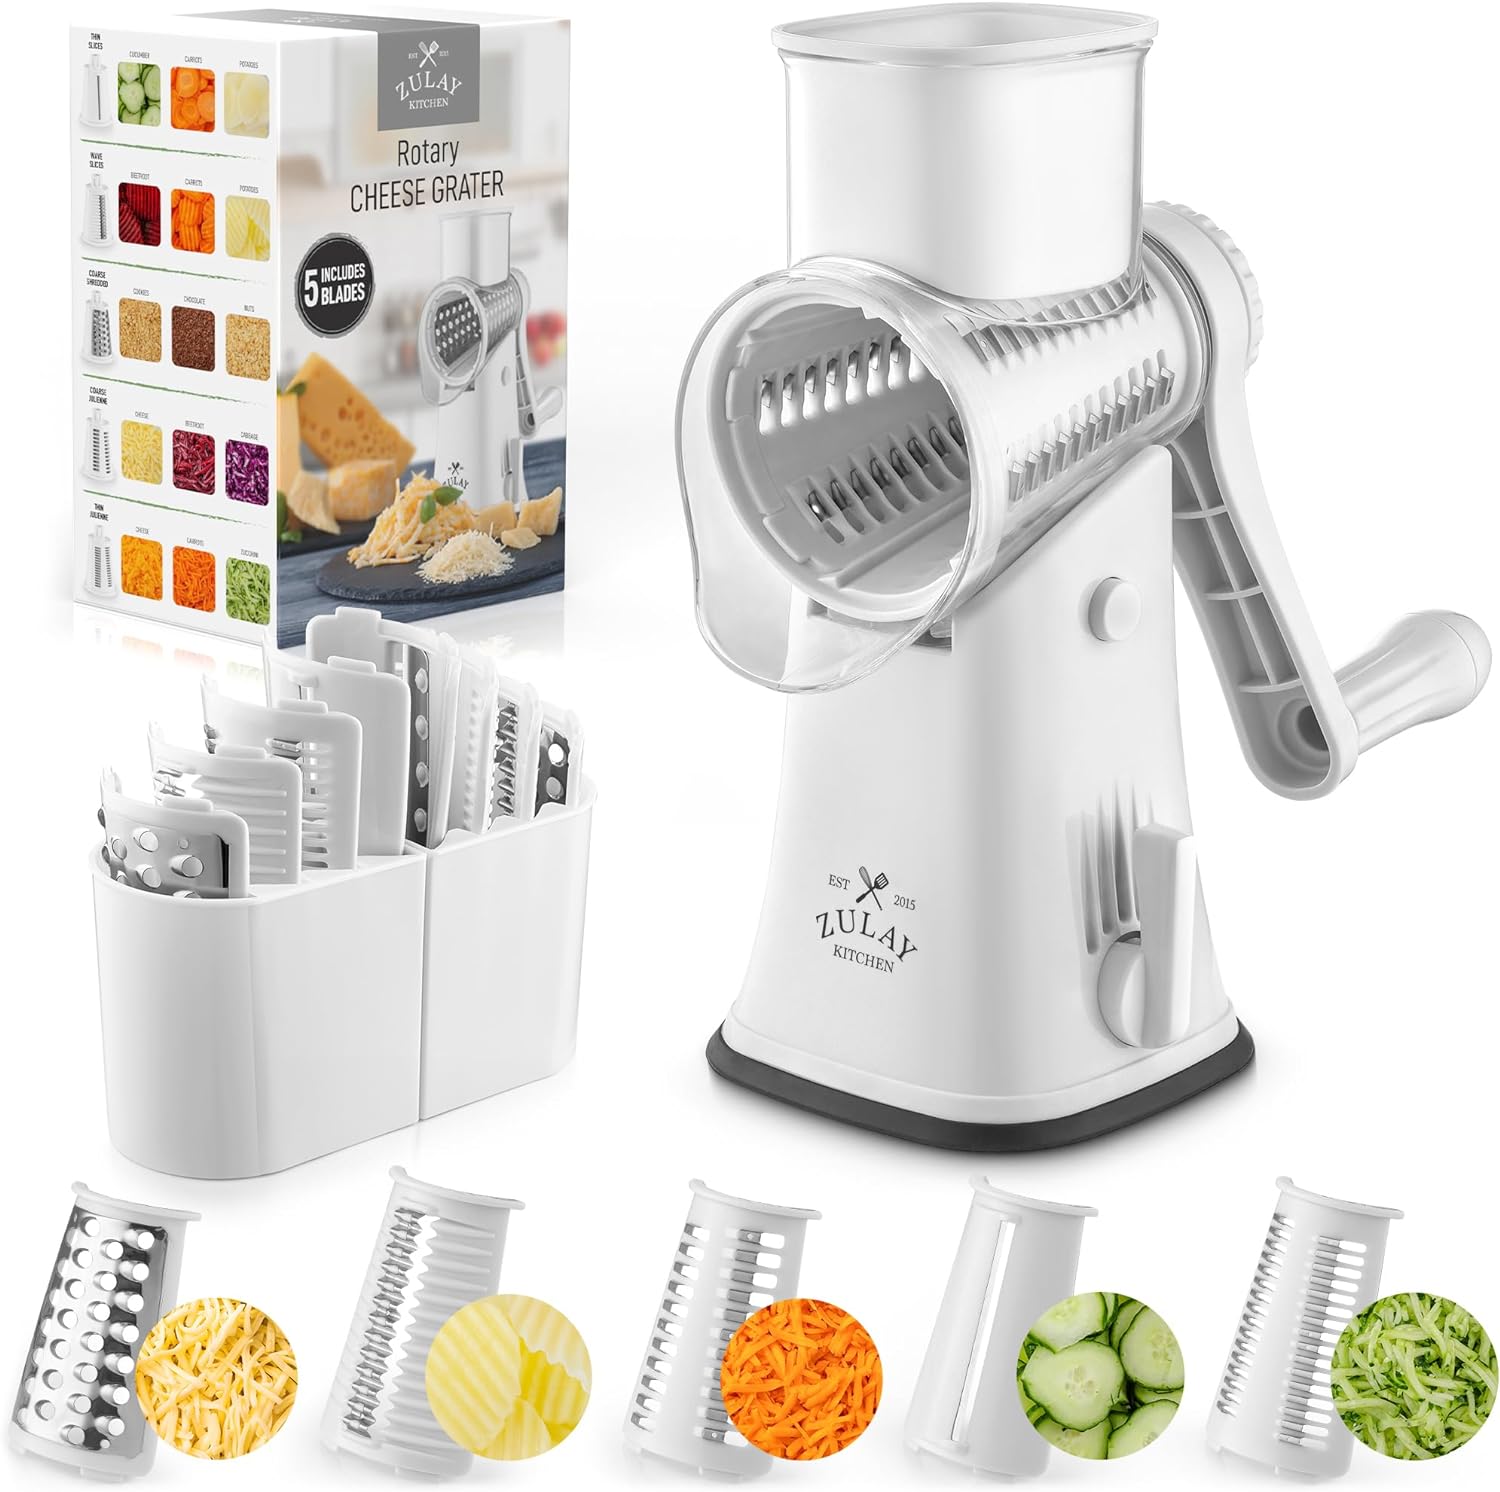 Zulay Kitchen Rotary Cheese Grater With Upgraded, Reinforced